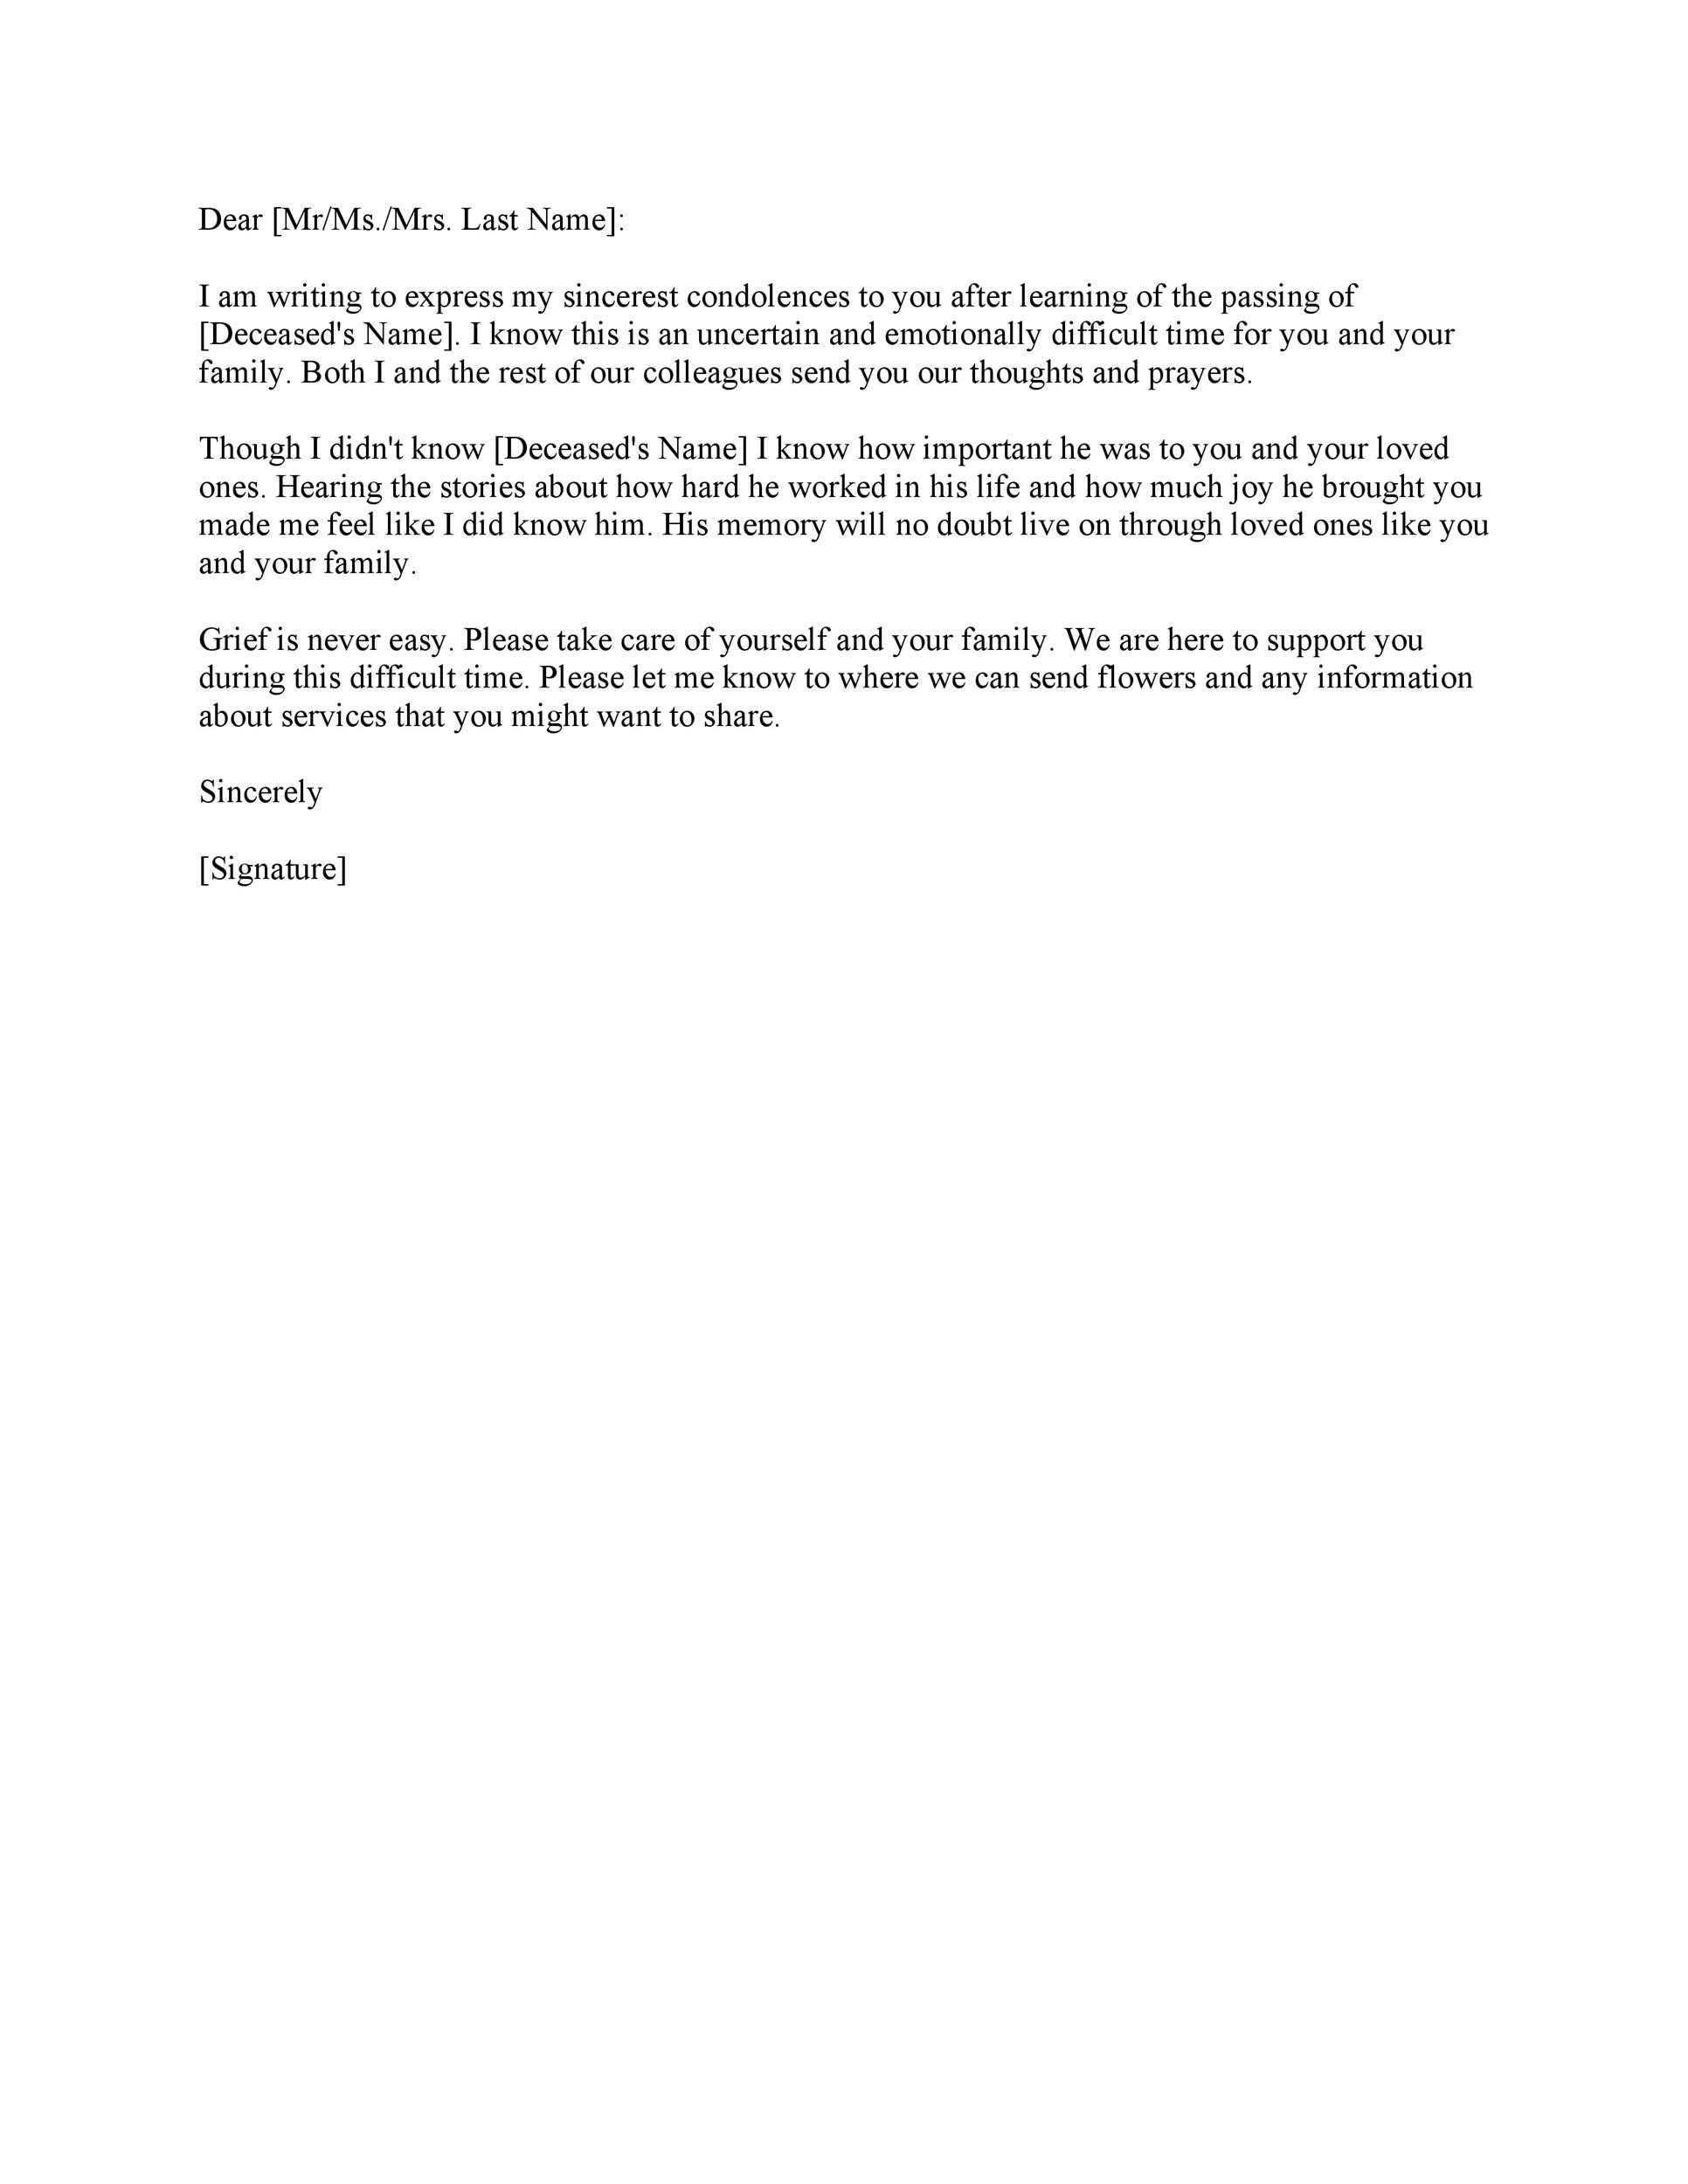 Condolences Letter To Client from templatelab.com